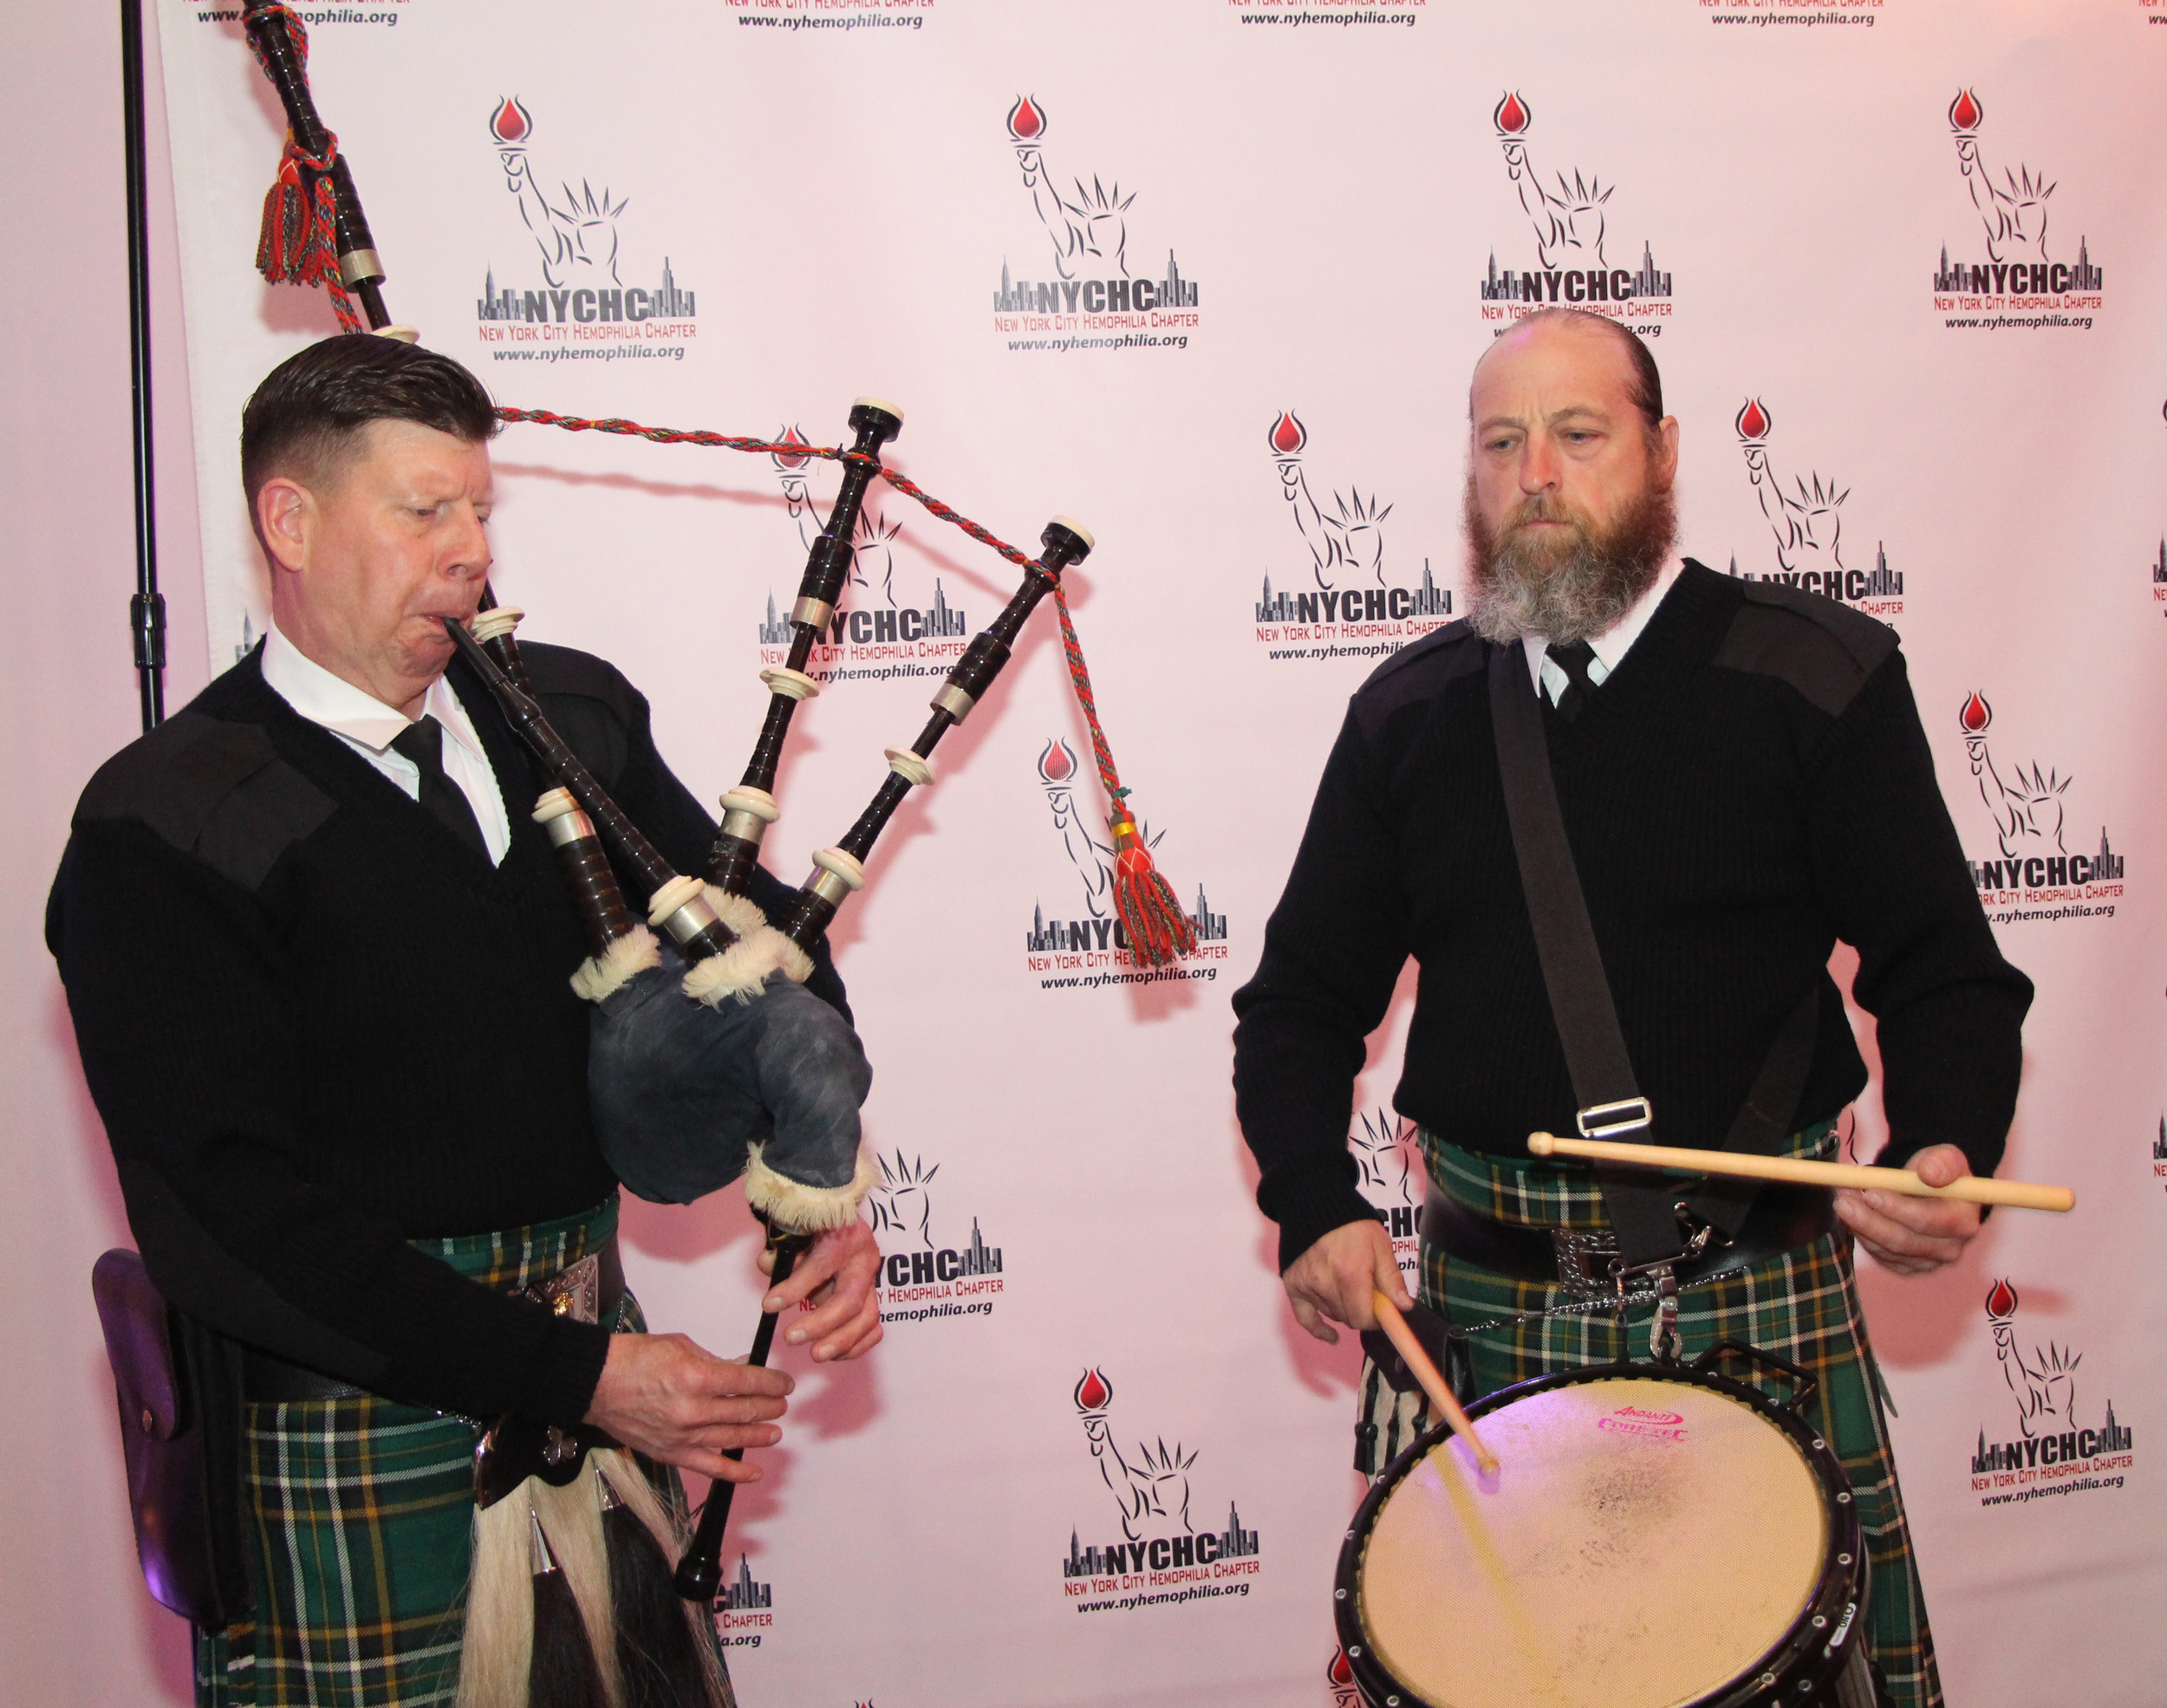 Peter Ledwith, left, and Kevin McTigue provided music for the event with bagpipes and drums.